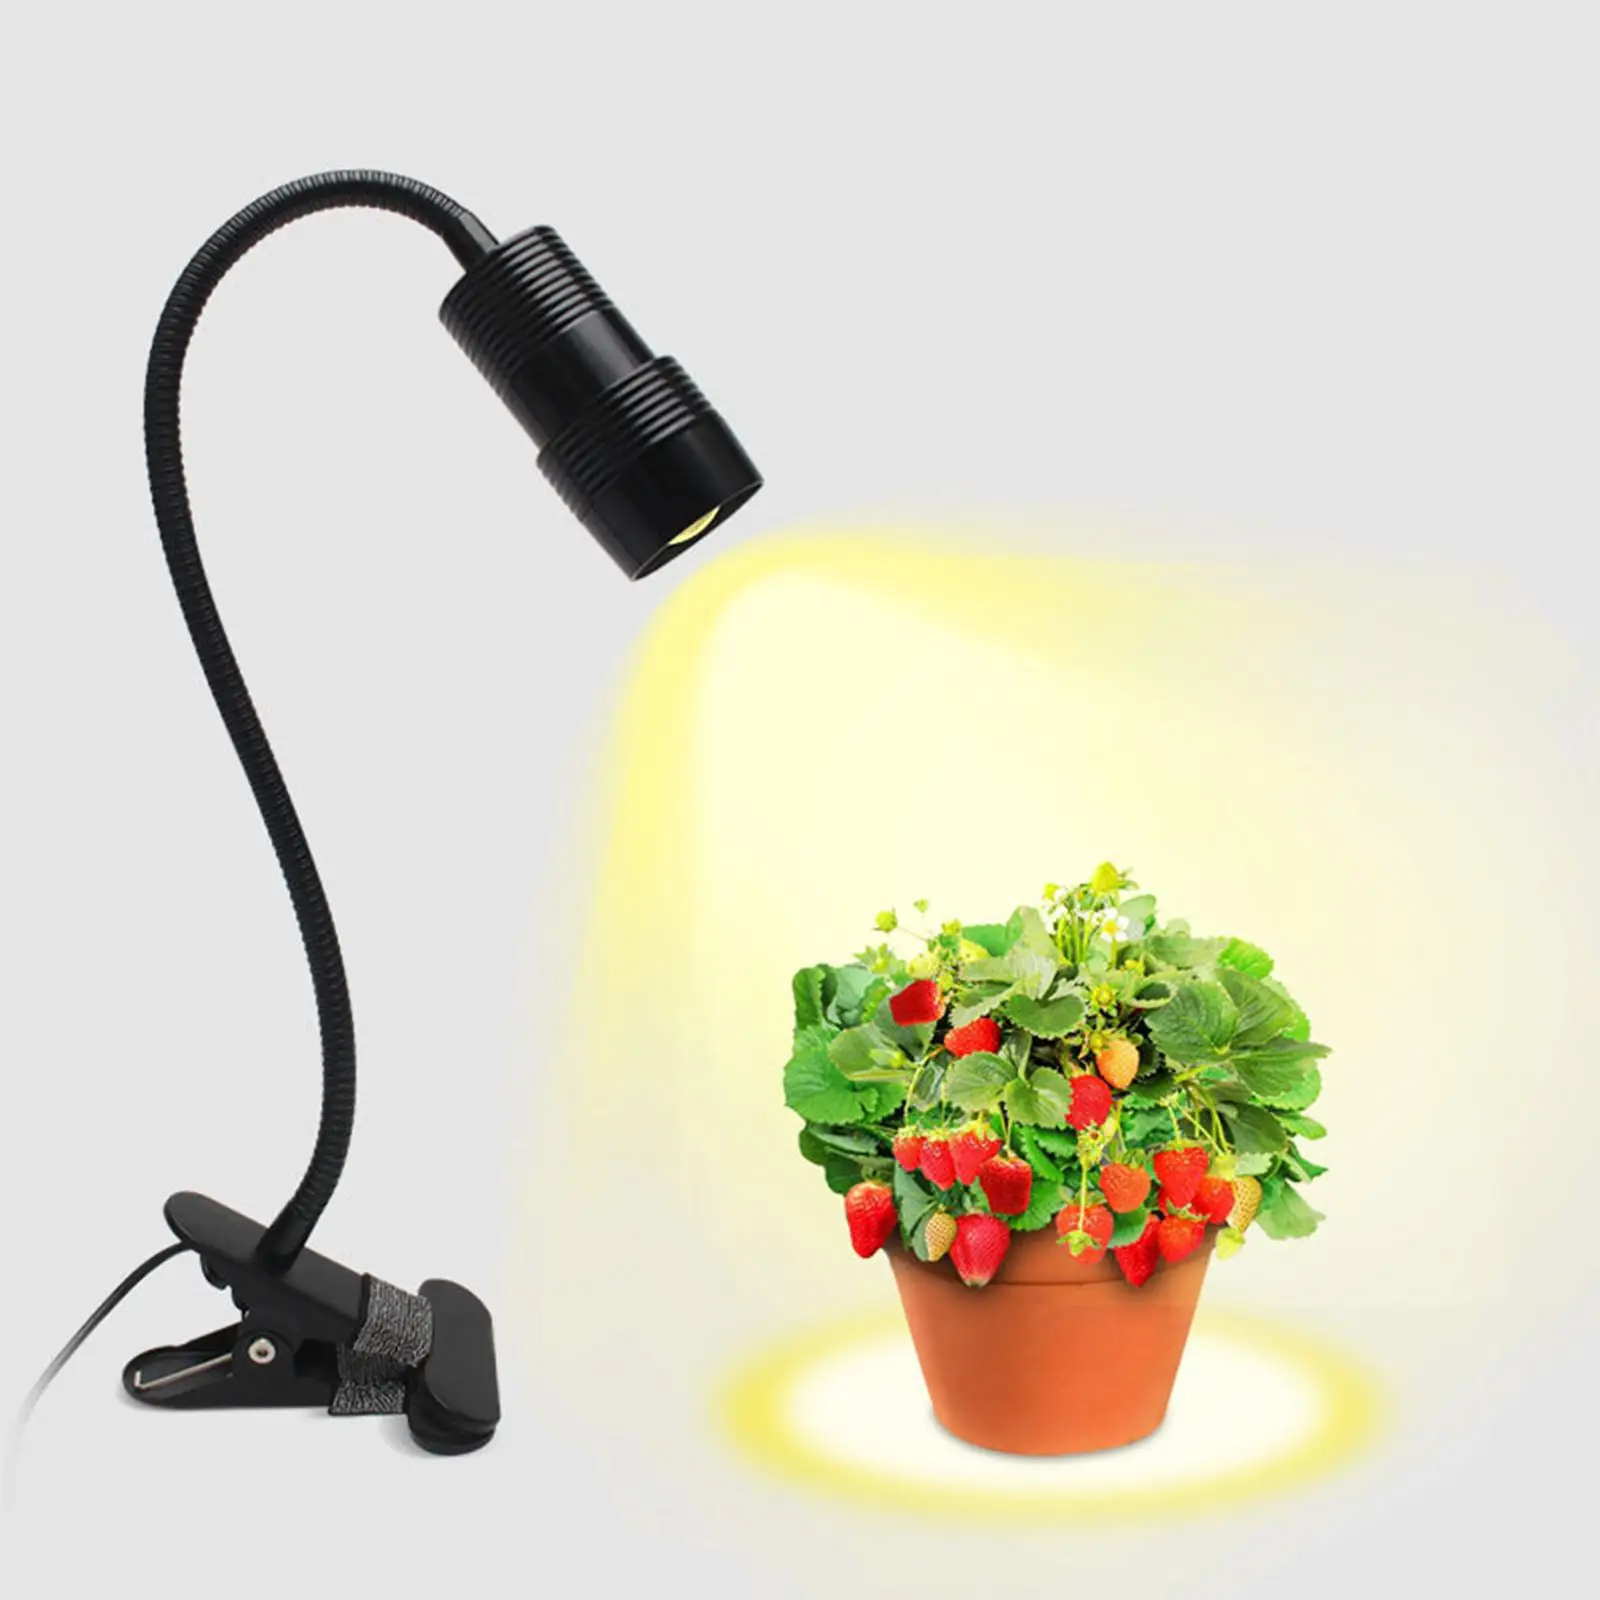 Grow Lights Full Spectrum Lighting Dimmable Levels Timing LED Growing Lamp for Indoor Plants Greenhouse Seed Starter Hydroponics